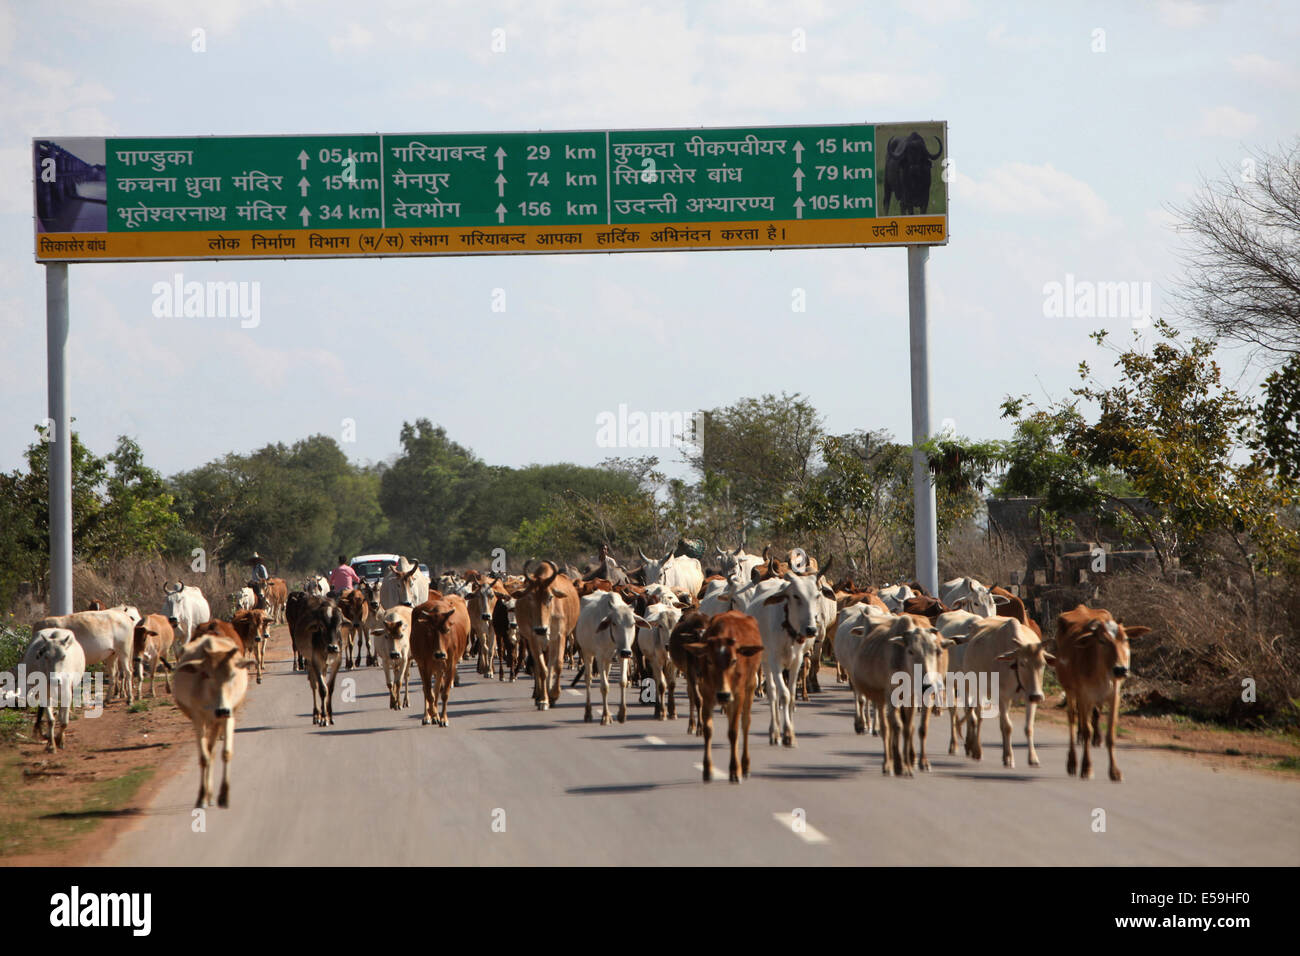 Cattle on the highway causing traffic jam, Chattisgadh, India Stock Photo